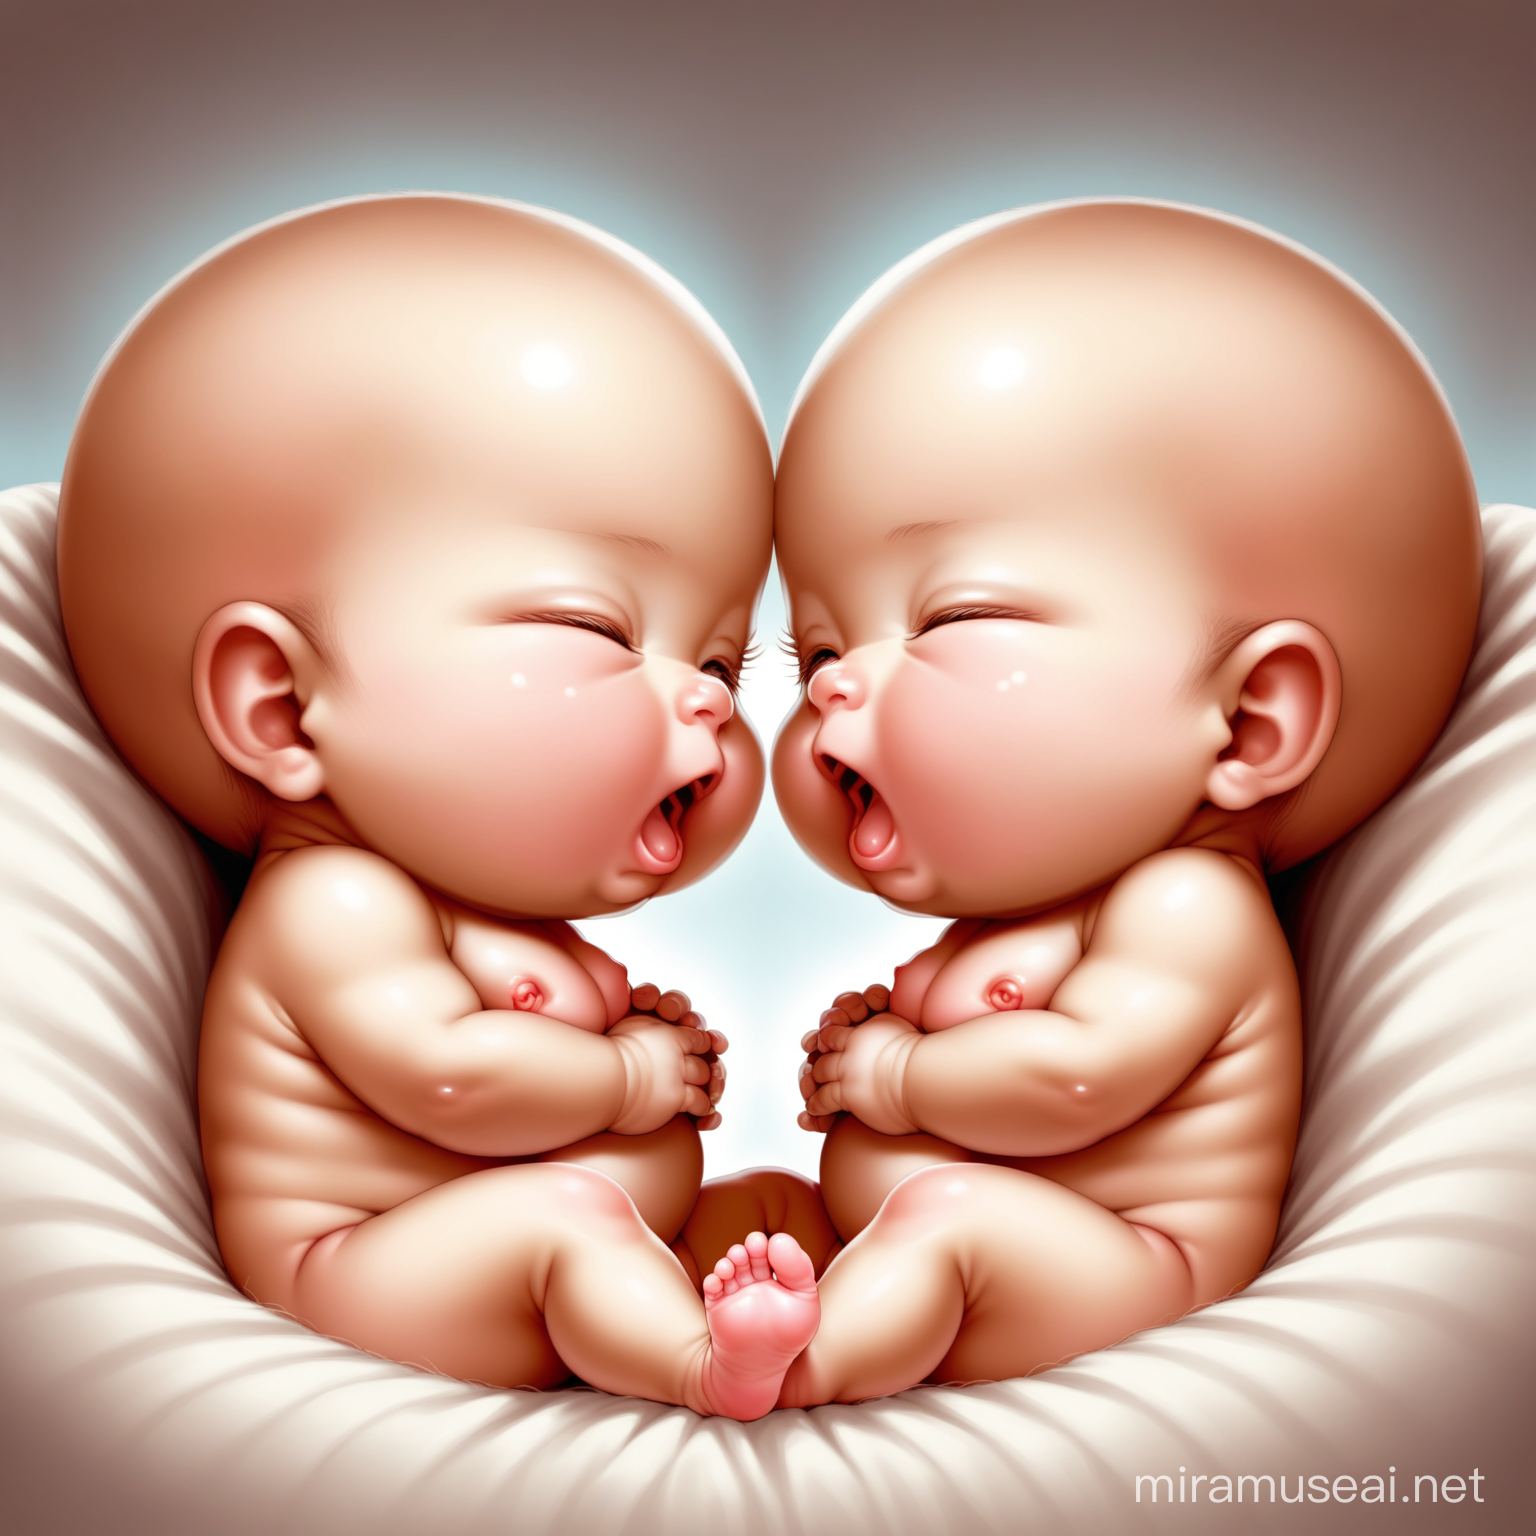 Imagine two twin brothers looking at each other with animosity in the womb as babies 